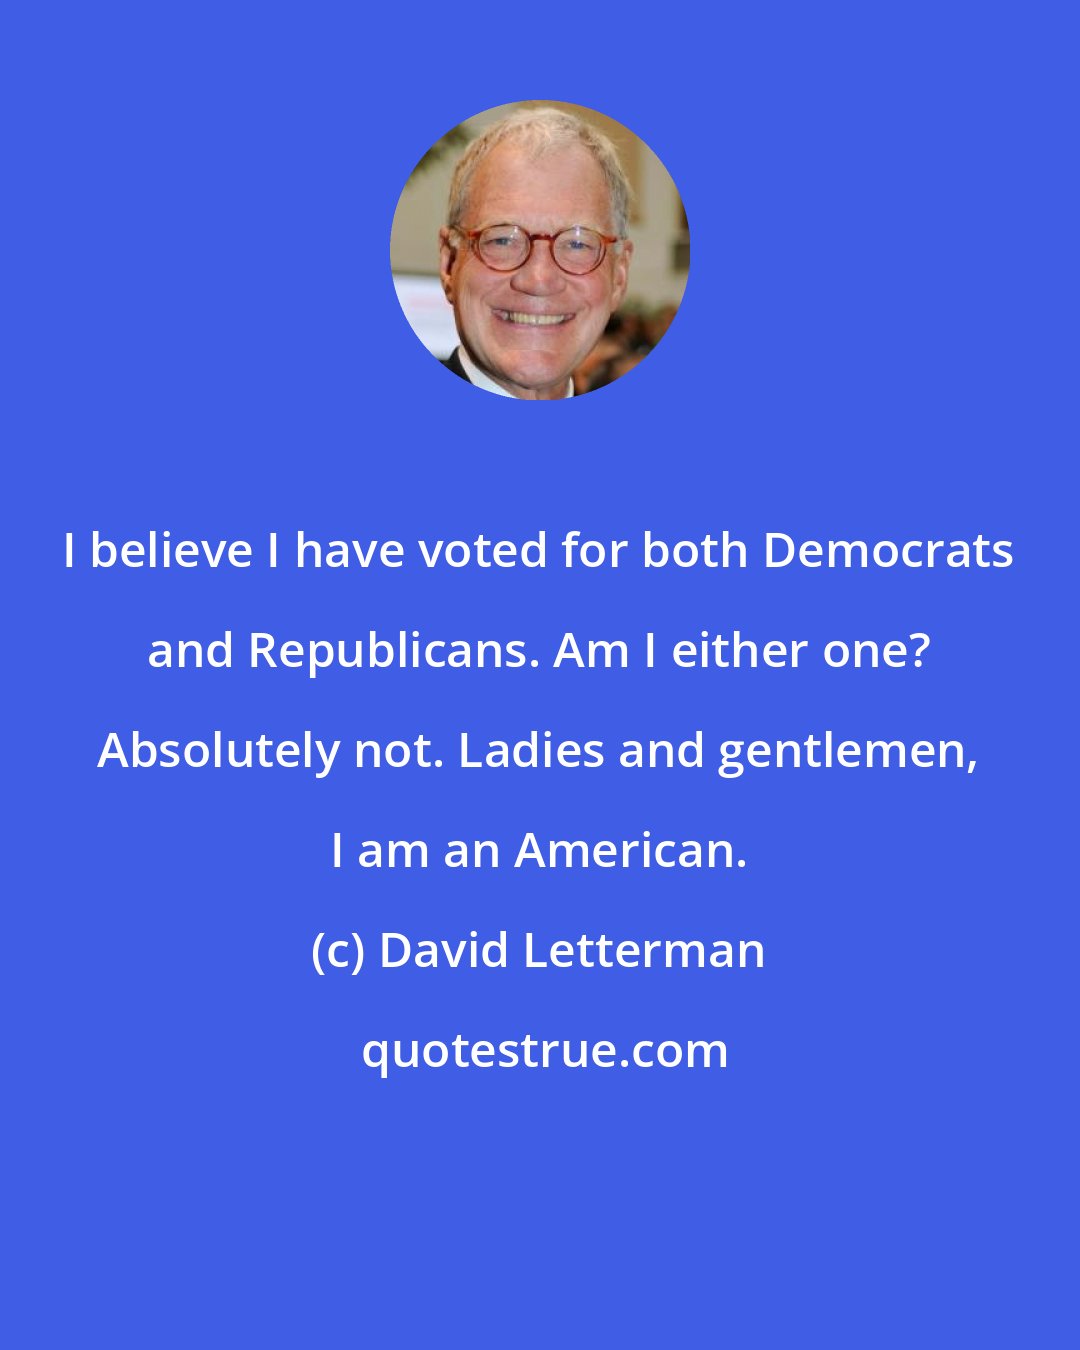 David Letterman: I believe I have voted for both Democrats and Republicans. Am I either one? Absolutely not. Ladies and gentlemen, I am an American.